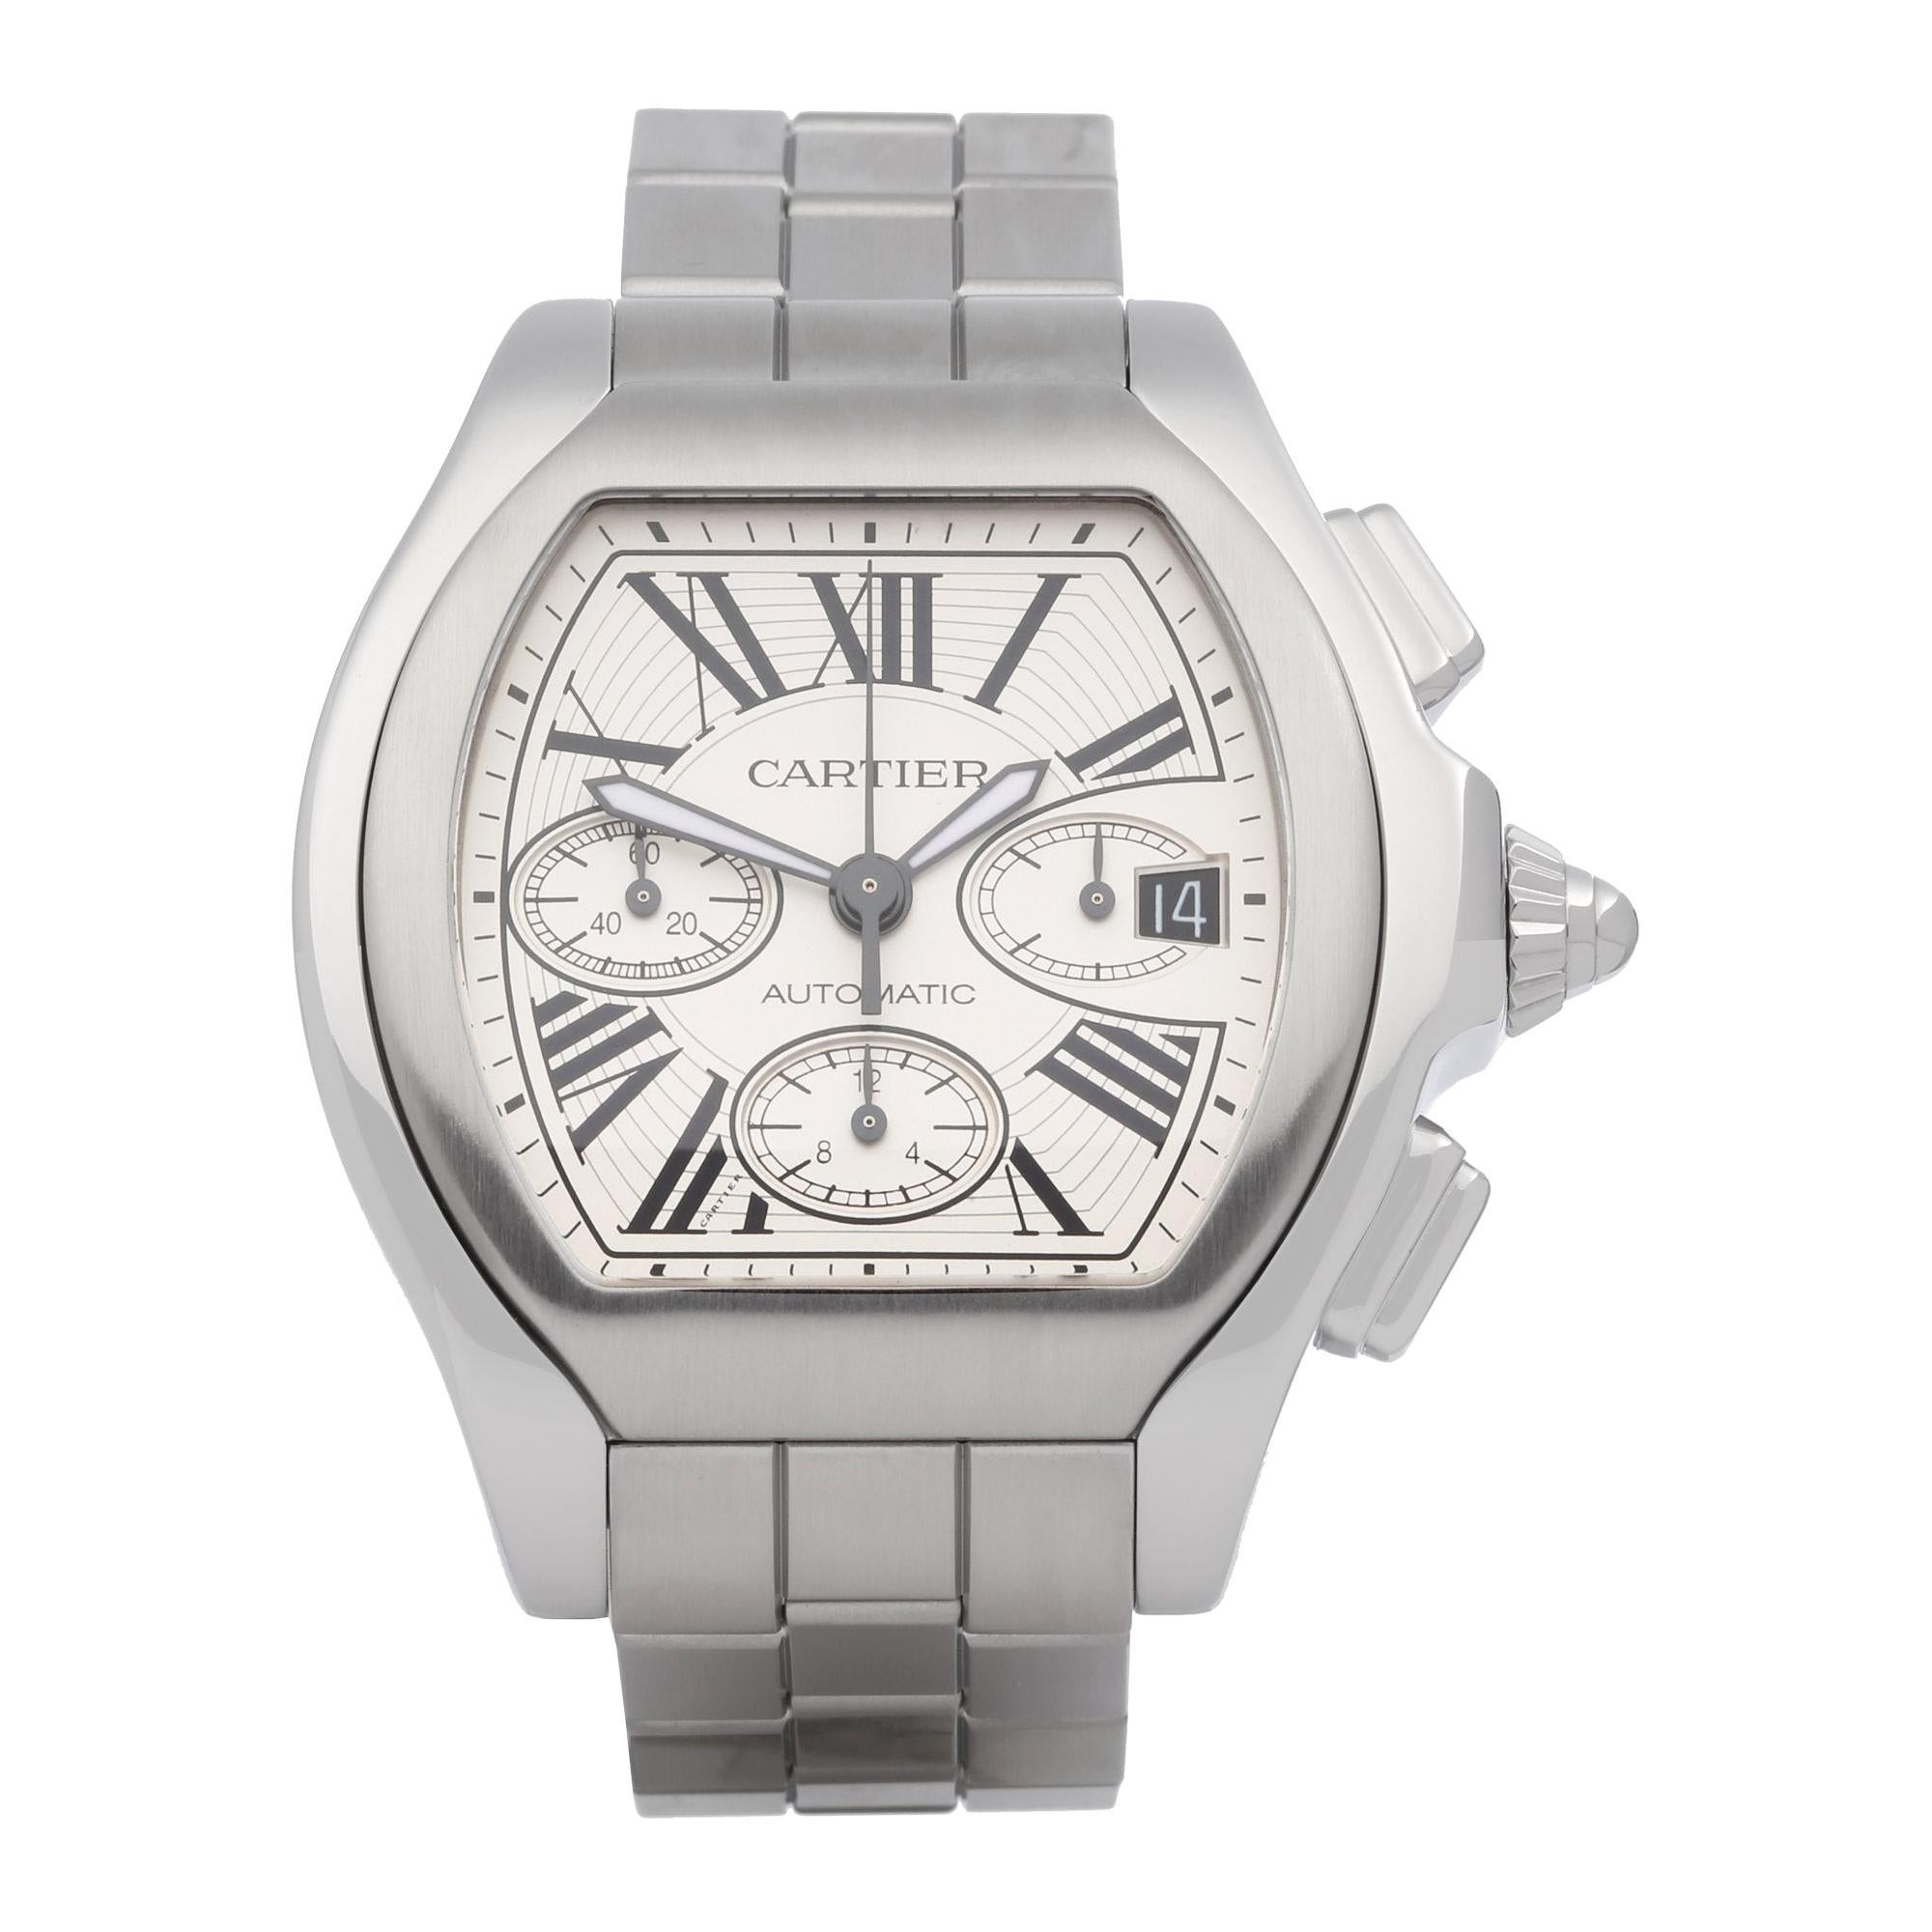 Cartier Roadster XL W6206019 or 3405 Men Stainless Steel Chronograph Watch